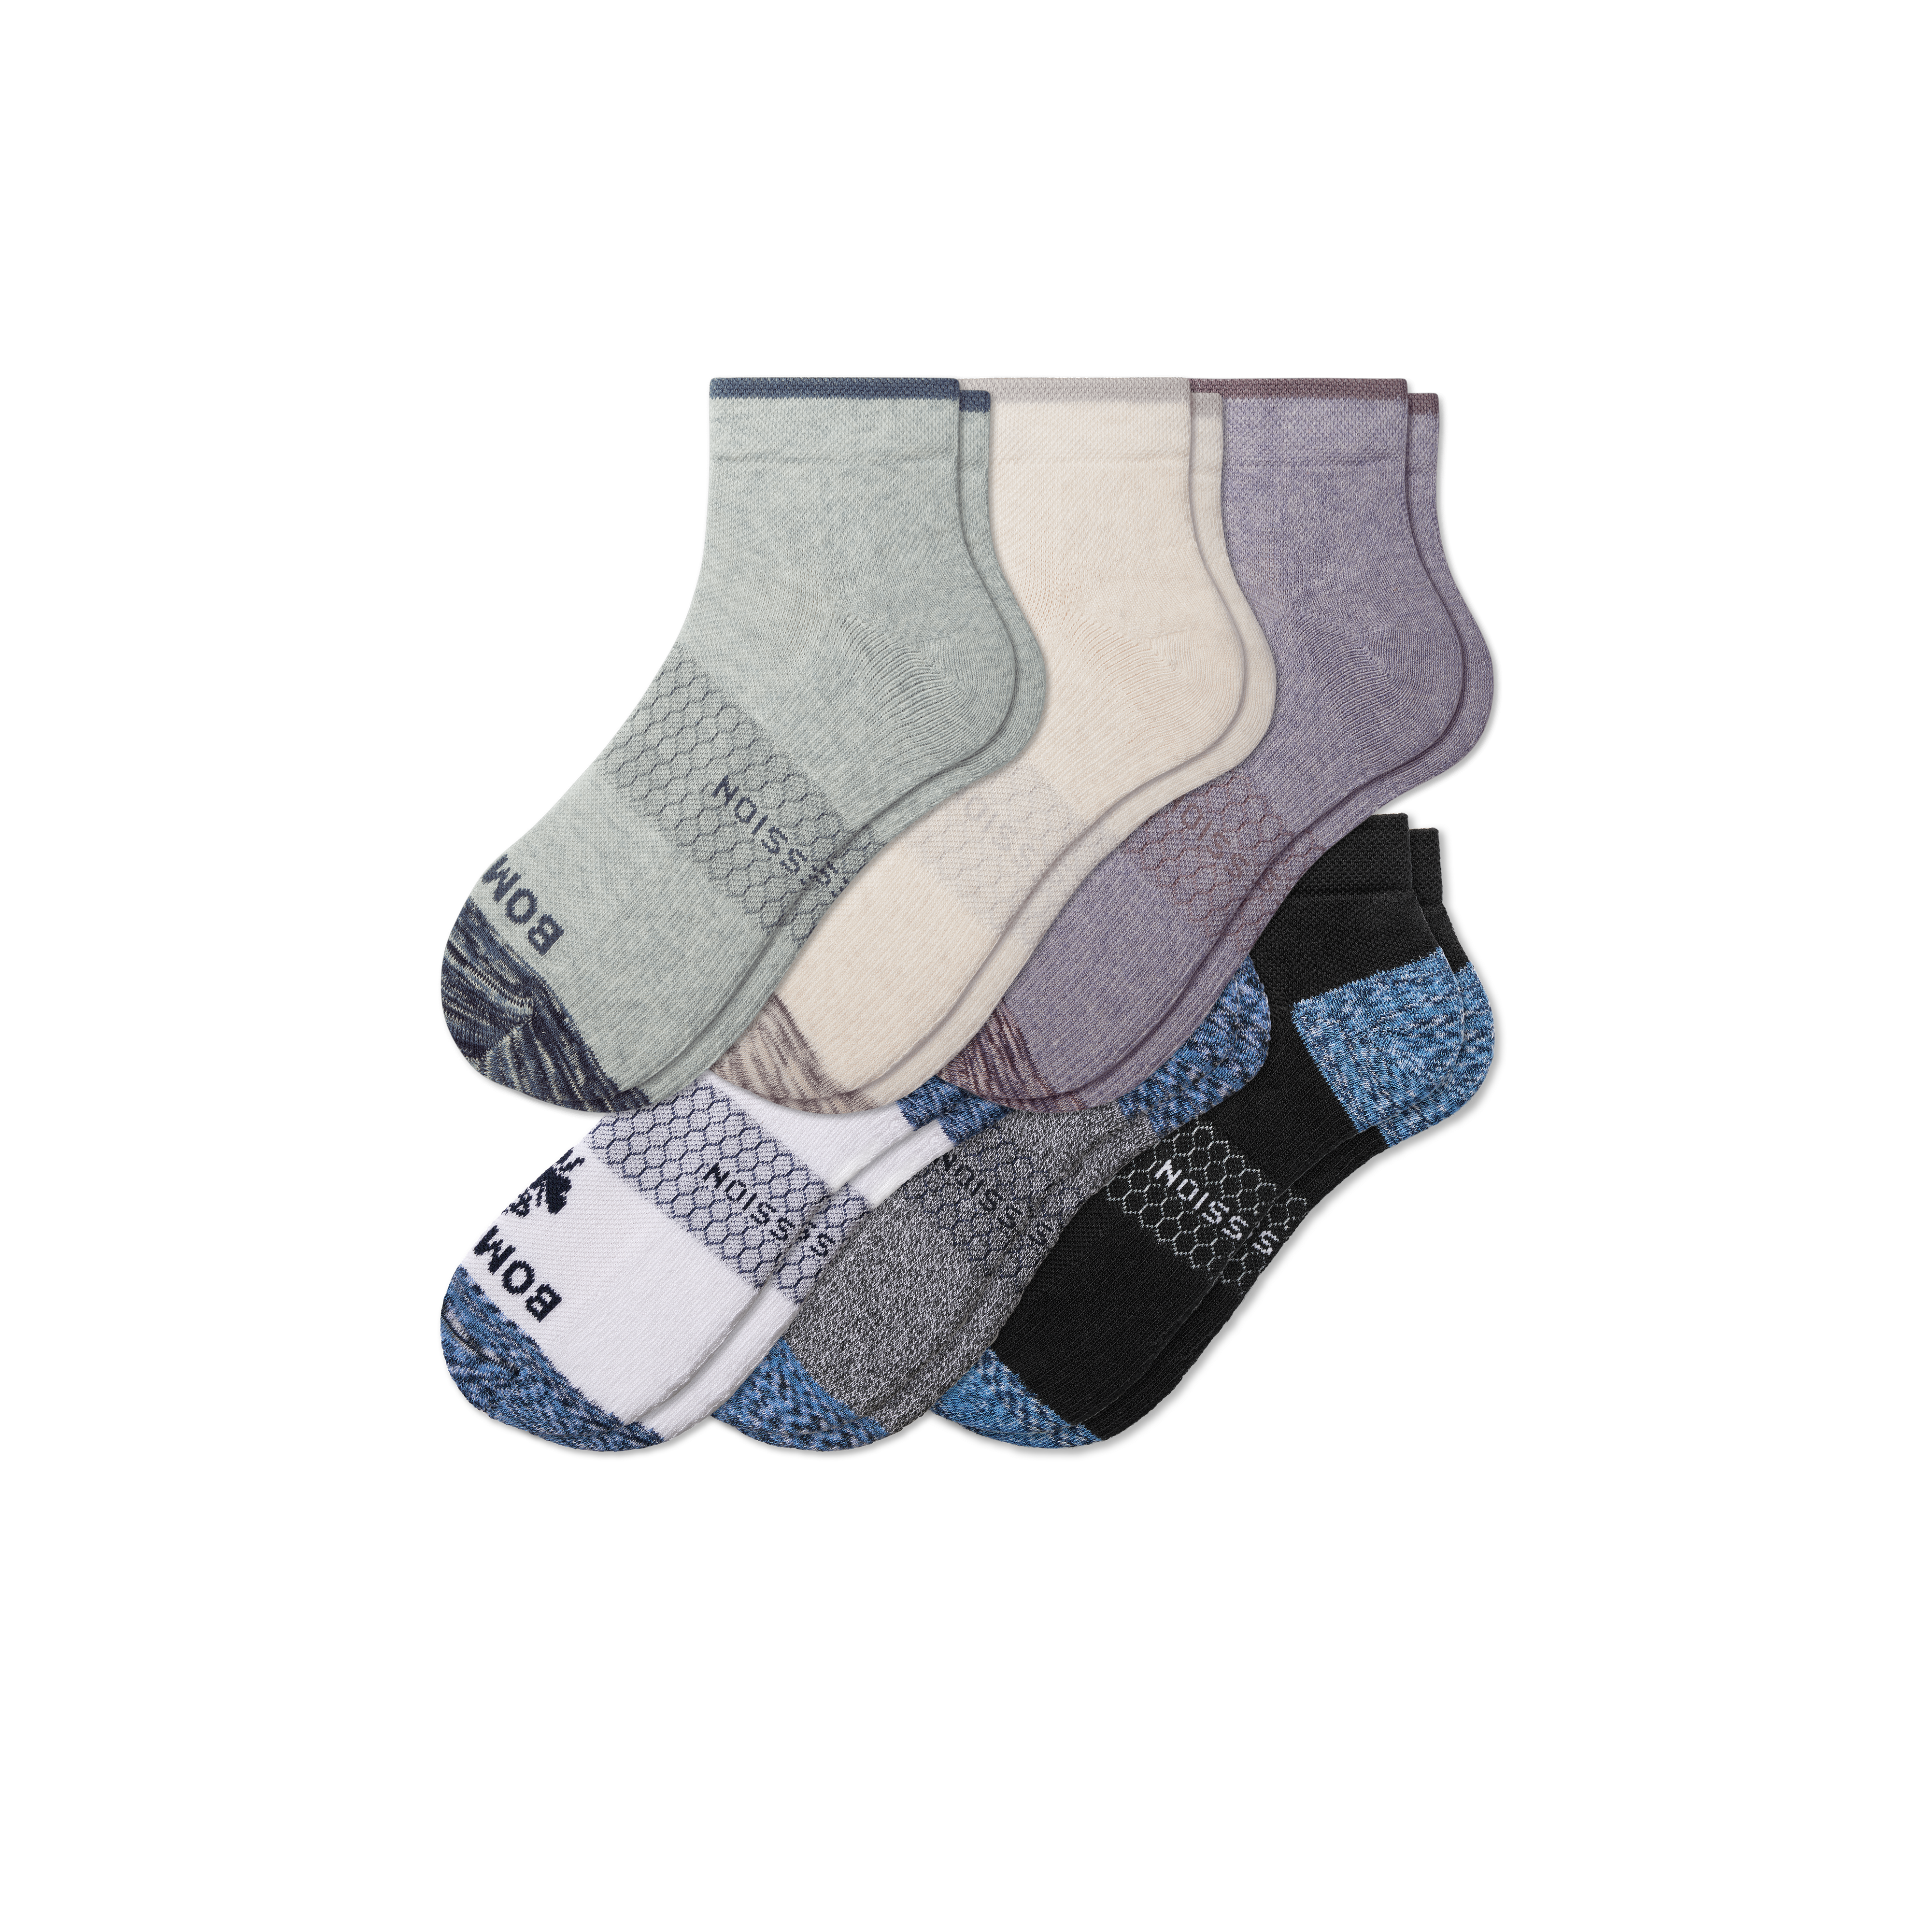 Bombas Ankle Compression Socks 6-pack In Lavender Solids Mix